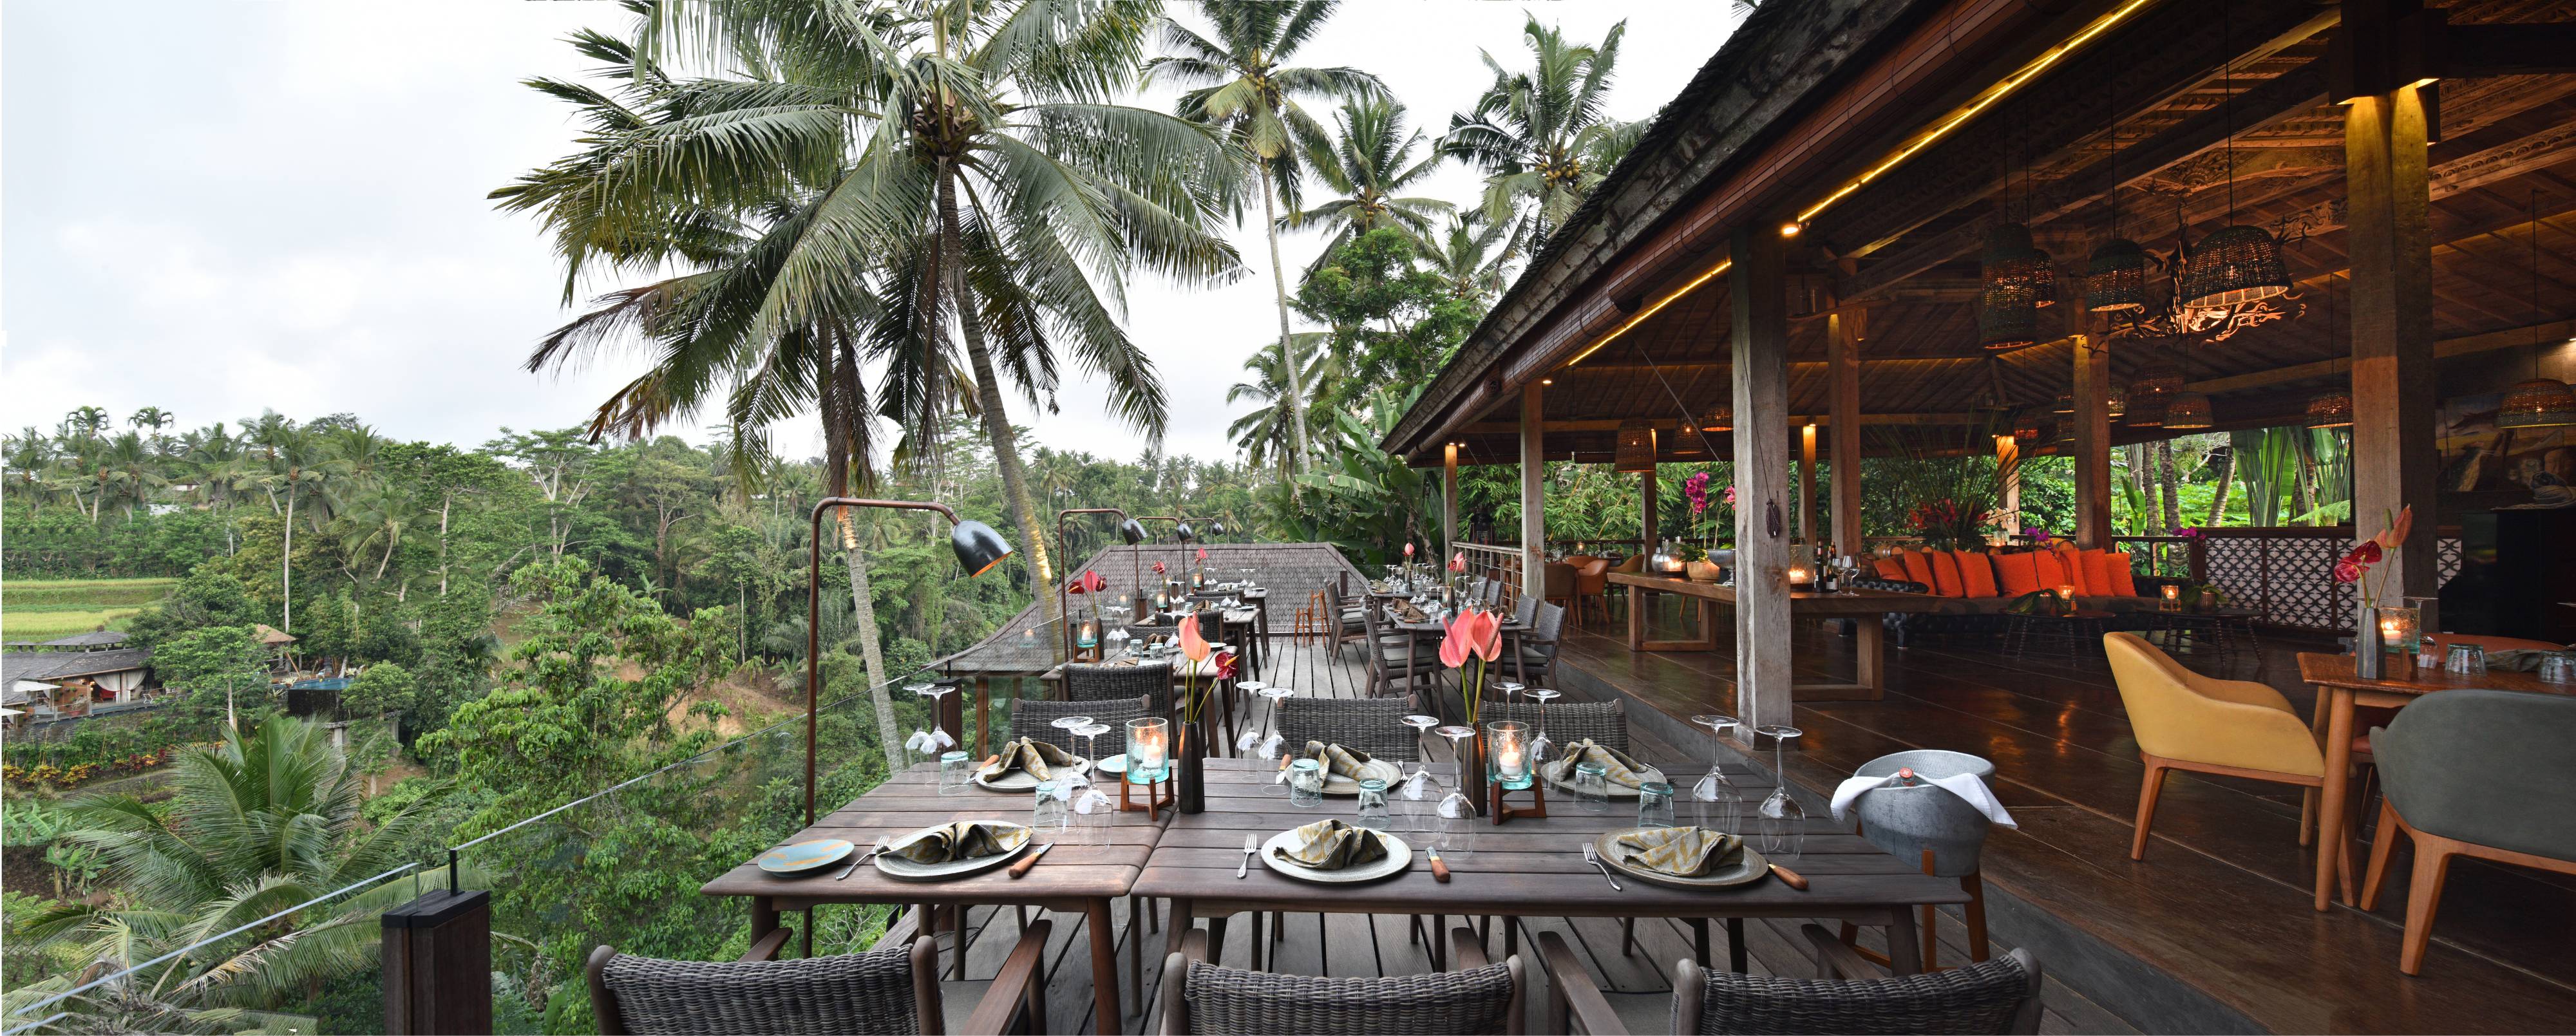 , Romantic meal for two at Jungle Fish Restaurant